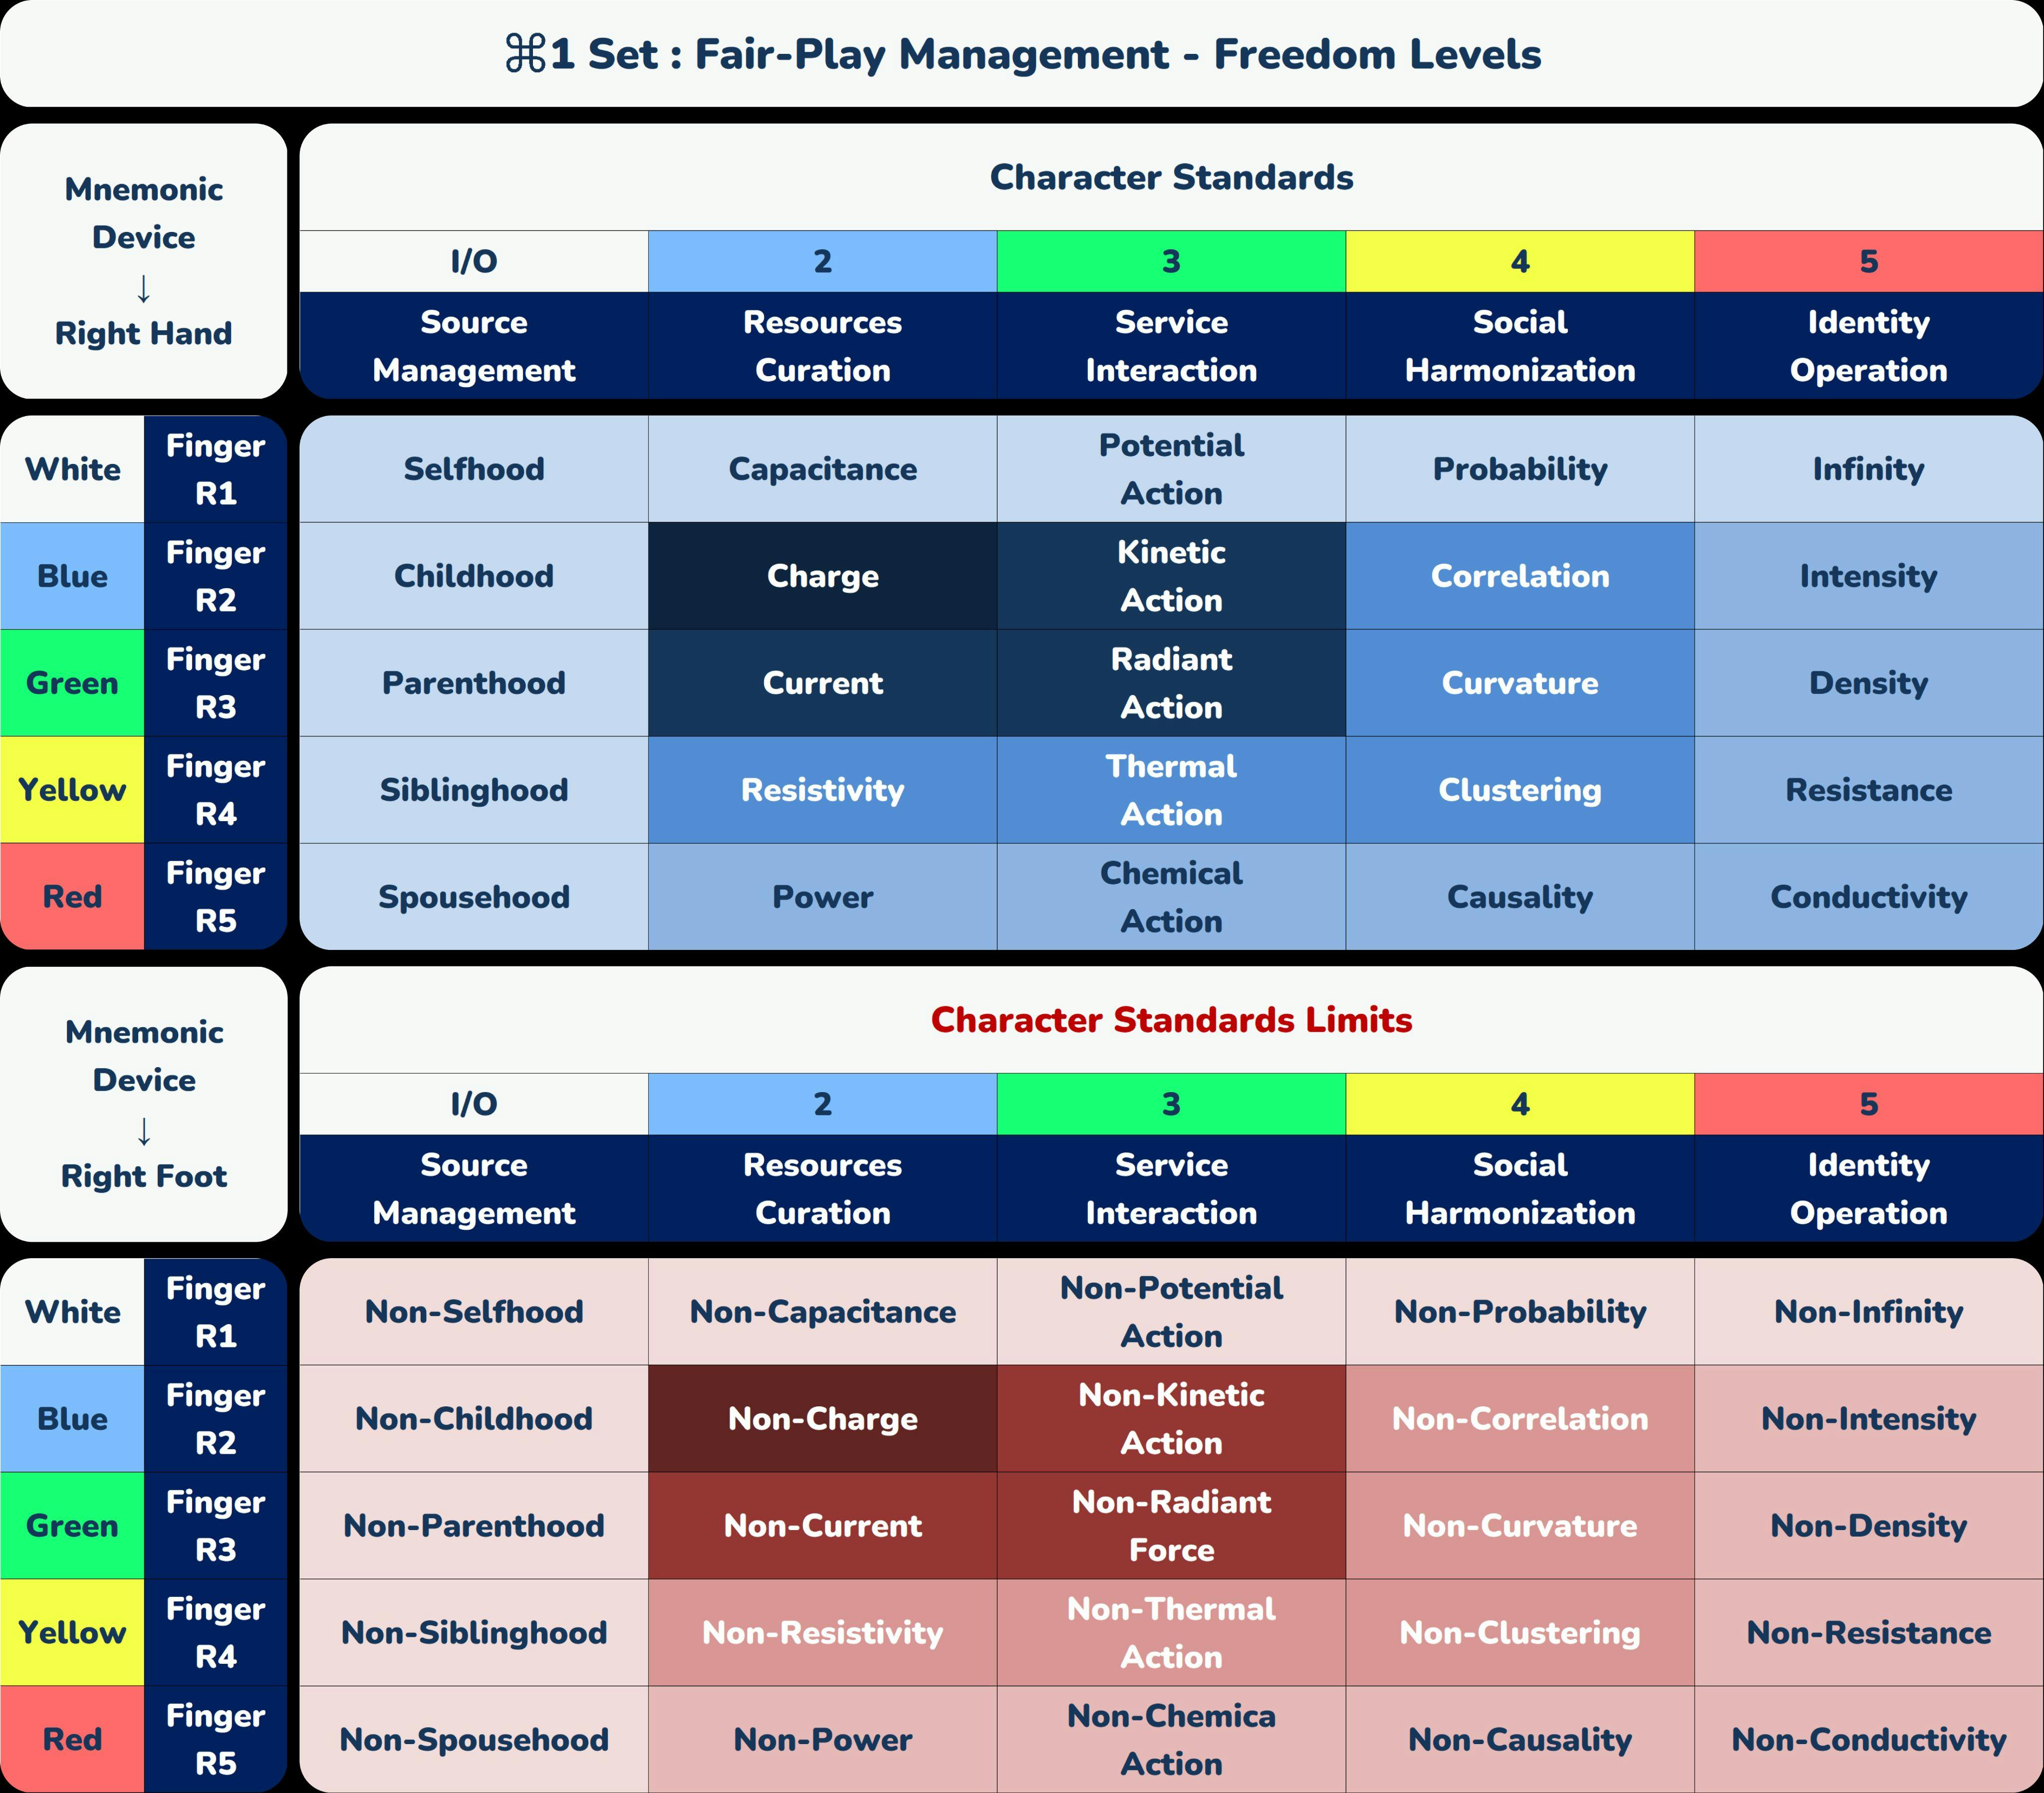 ⌘1 Set _ Fair-Play Management - Freedom Levels.png